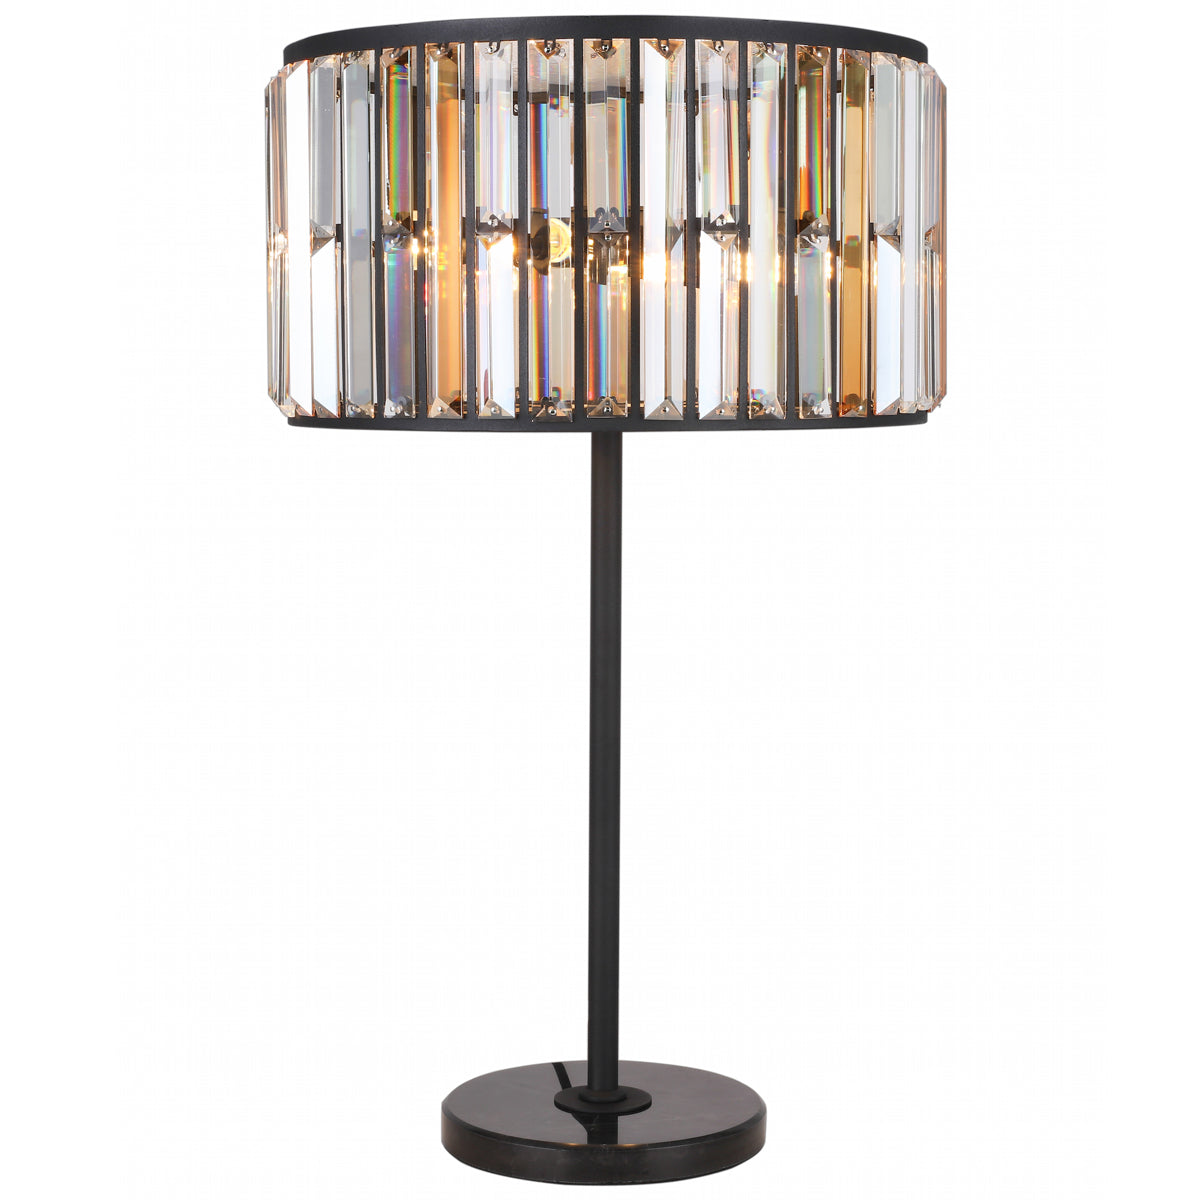 Looking for something that little more extravagant that will give your room the touch of luxury that it really deserves. Our Amber Crystal table lamp does just that with its bronze, brown and silver glass crystals in a round design and complemented with a black metal and marble stand creating something truly spectacular.